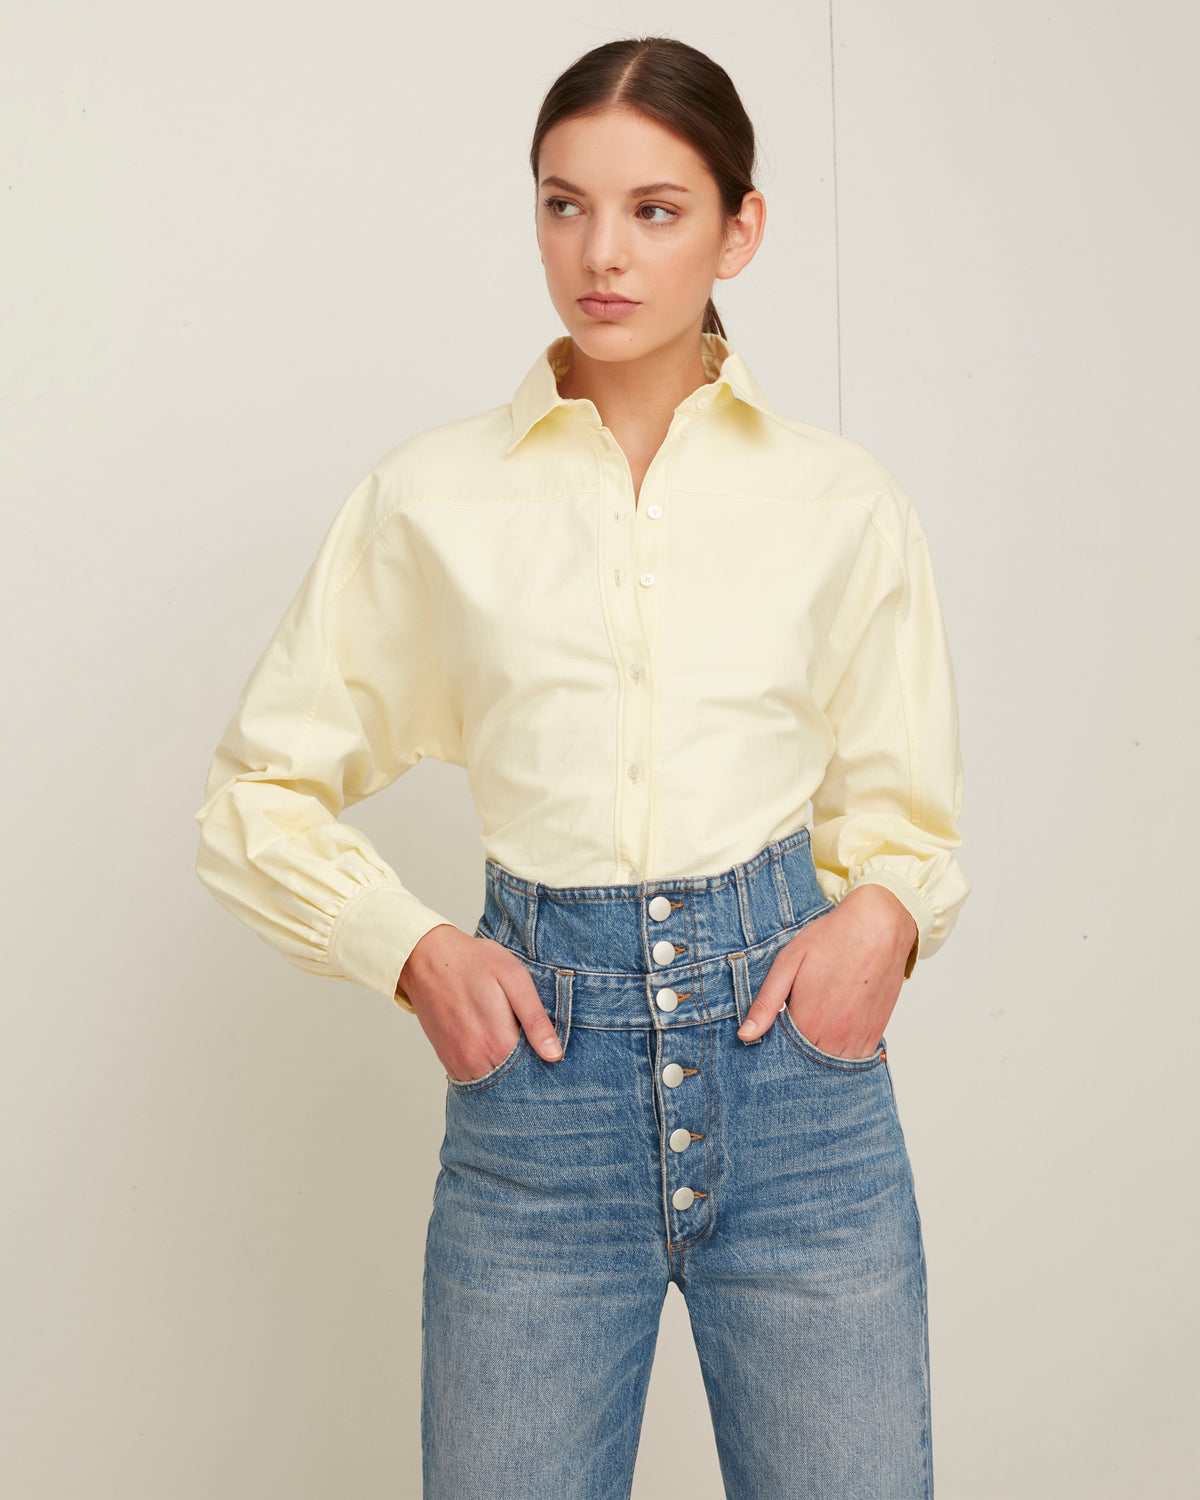 Emmerson Oxford Shirt in Canary